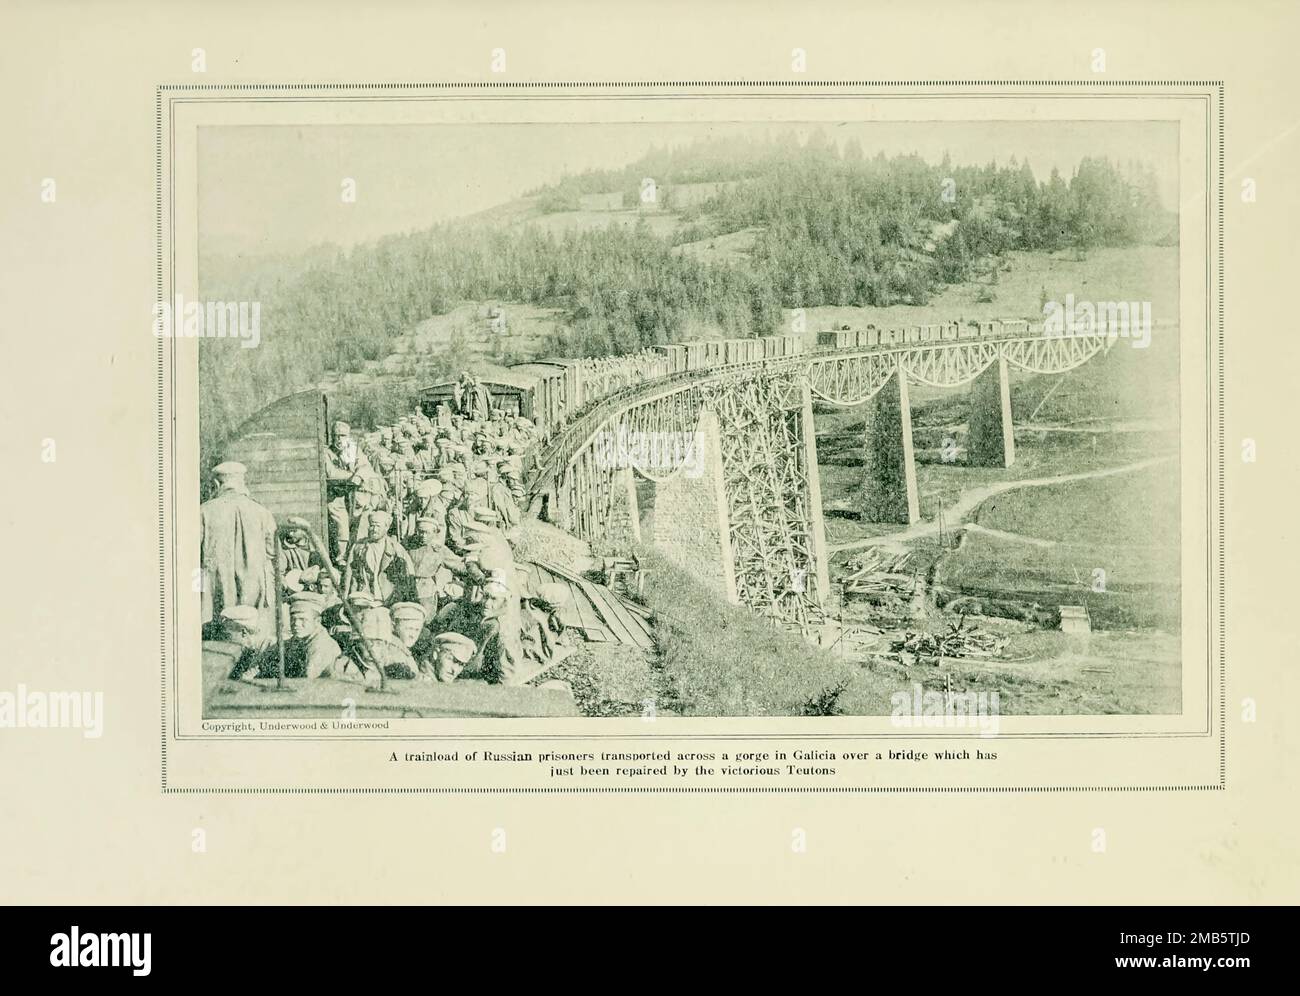 Transporting Russian Prisoners Across a Gorge in Galicia from the book The story of the great war; the complete historical records of events to date DIPLOMATIC AND STATE PAPERS by Reynolds, Francis Joseph, 1867-1937; Churchill, Allen Leon; Miller, Francis Trevelyan, 1877-1959; Wood, Leonard, 1860-1927; Knight, Austin Melvin, 1854-1927; Palmer, Frederick, 1873-1958; Simonds, Frank Herbert, 1878-; Ruhl, Arthur Brown, 1876-  Volume VII Published 1920 Stock Photo